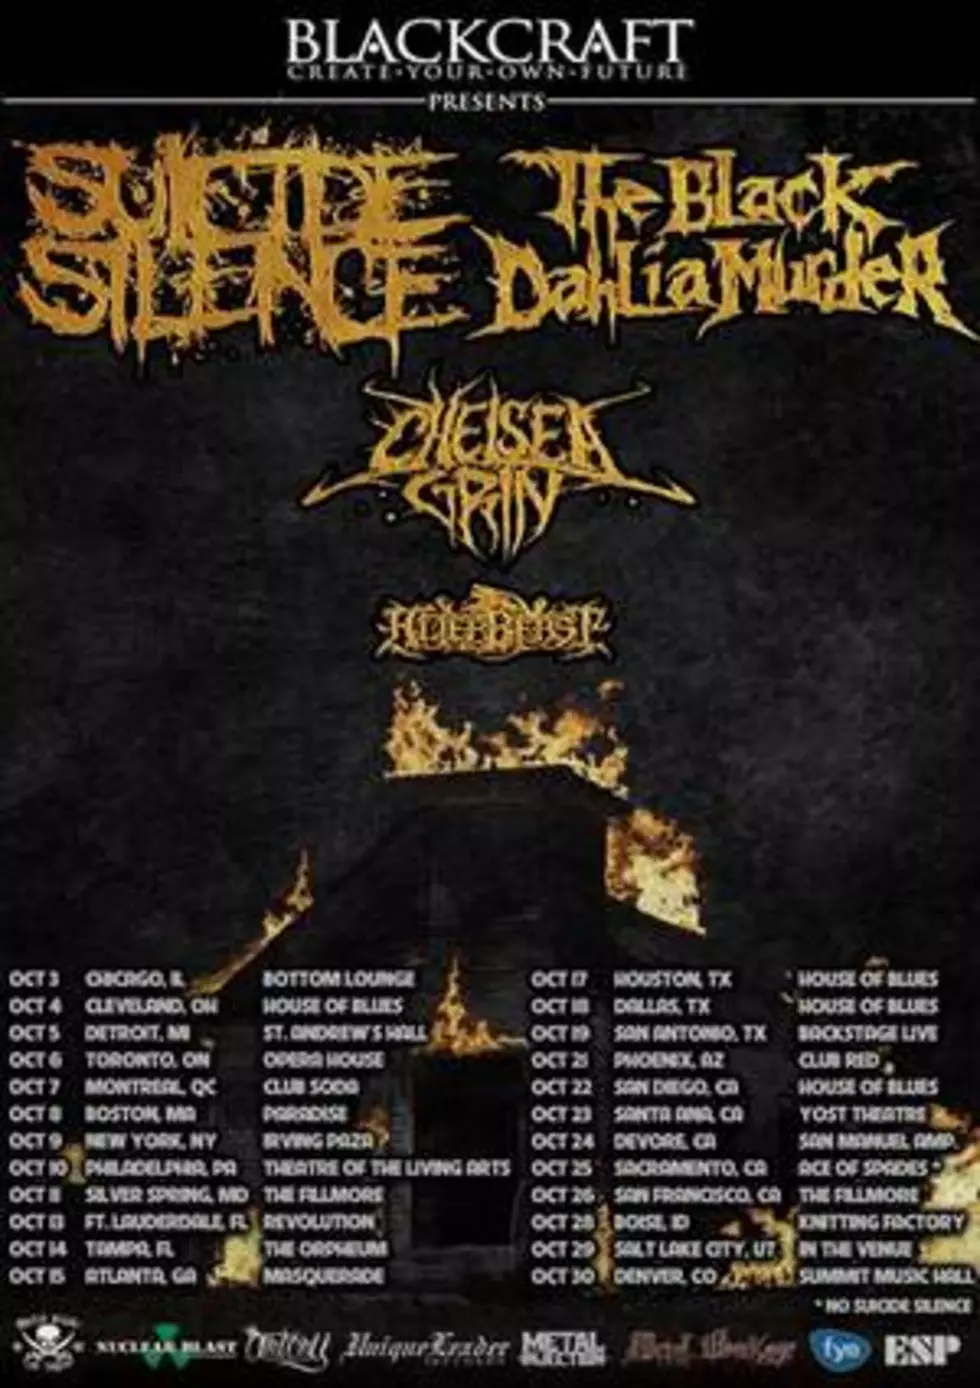 Suicide Silence + The Black Dahlia Murder Team Up For Fall 2014 Co-Headlining Tour